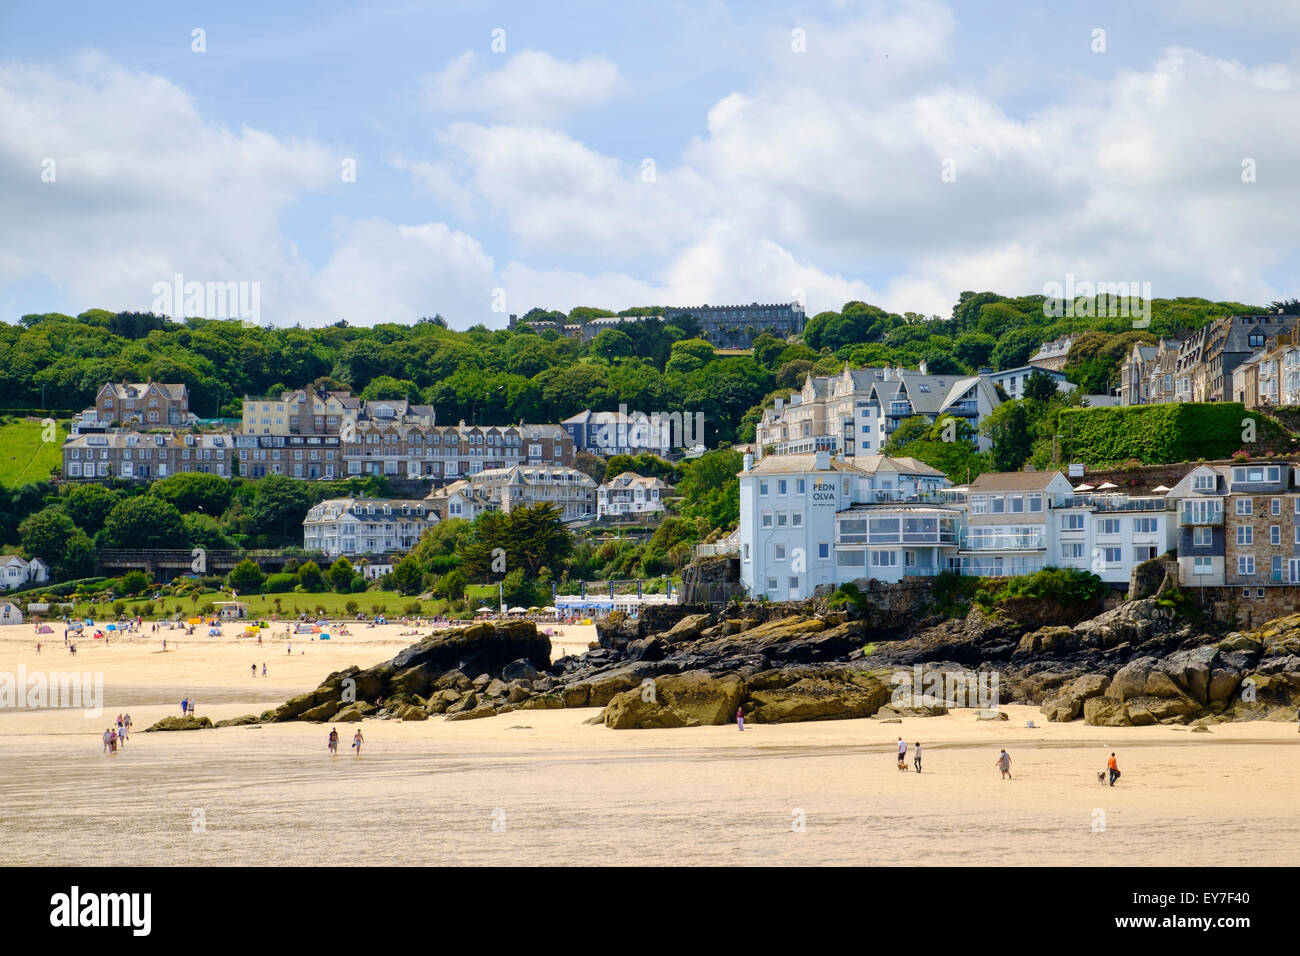 St Ives, Cornwall, England, UK - people on the beach in summer Stock Photo